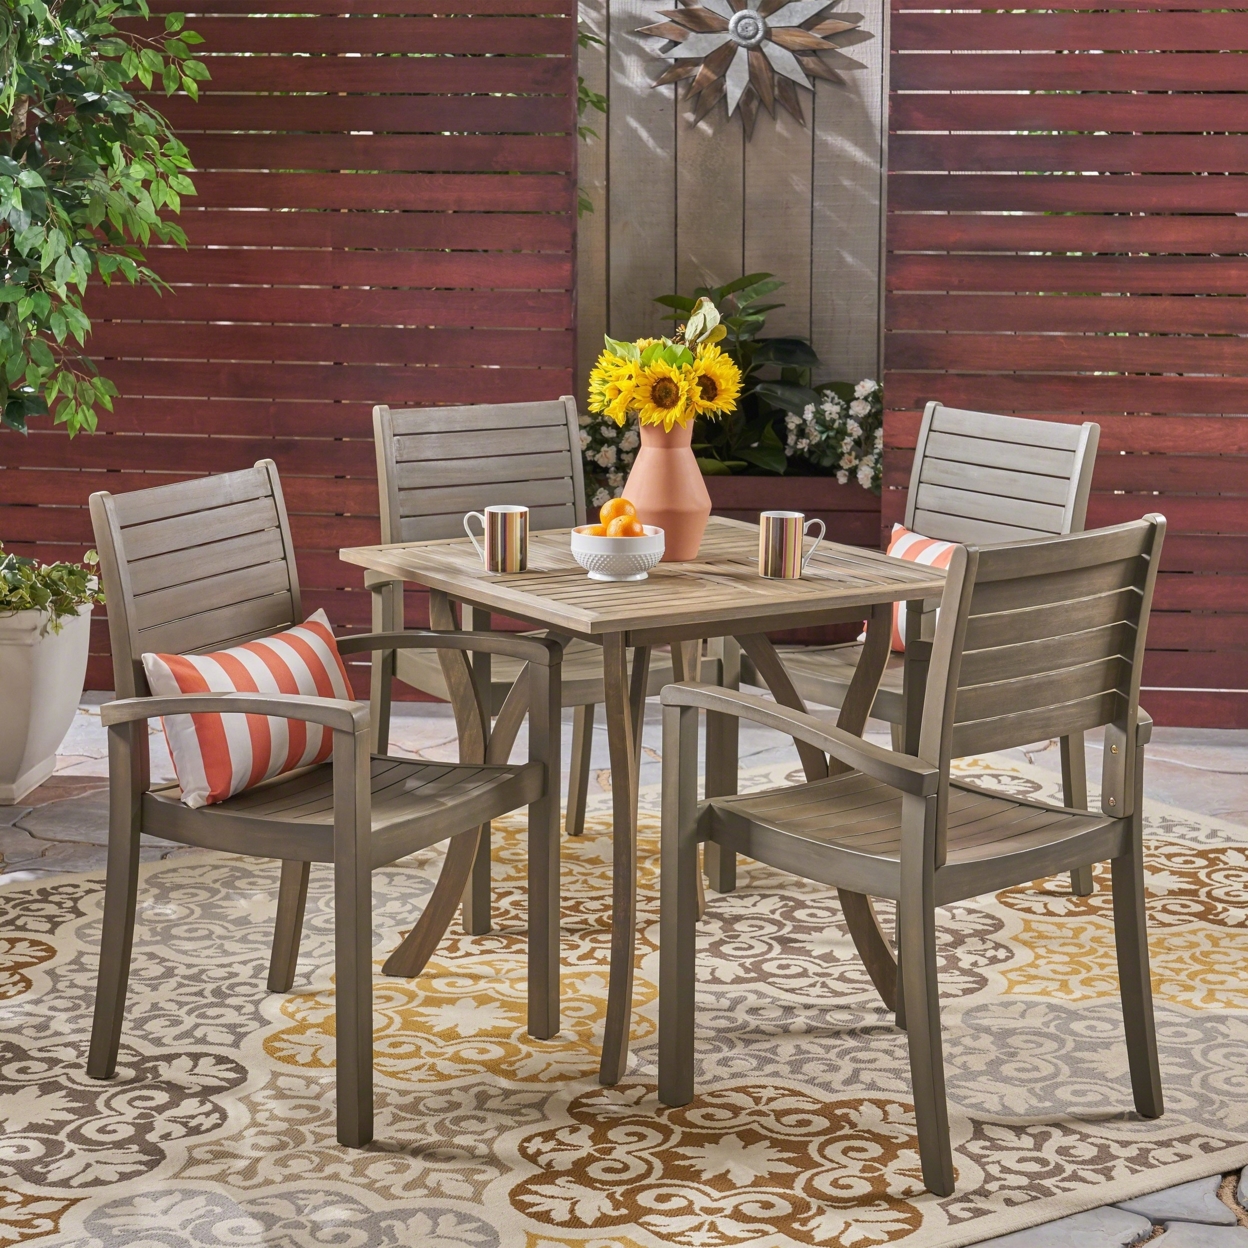 Carr Outdoor 4-Seater Square Acacia Wood Dining Set, Gray Finish